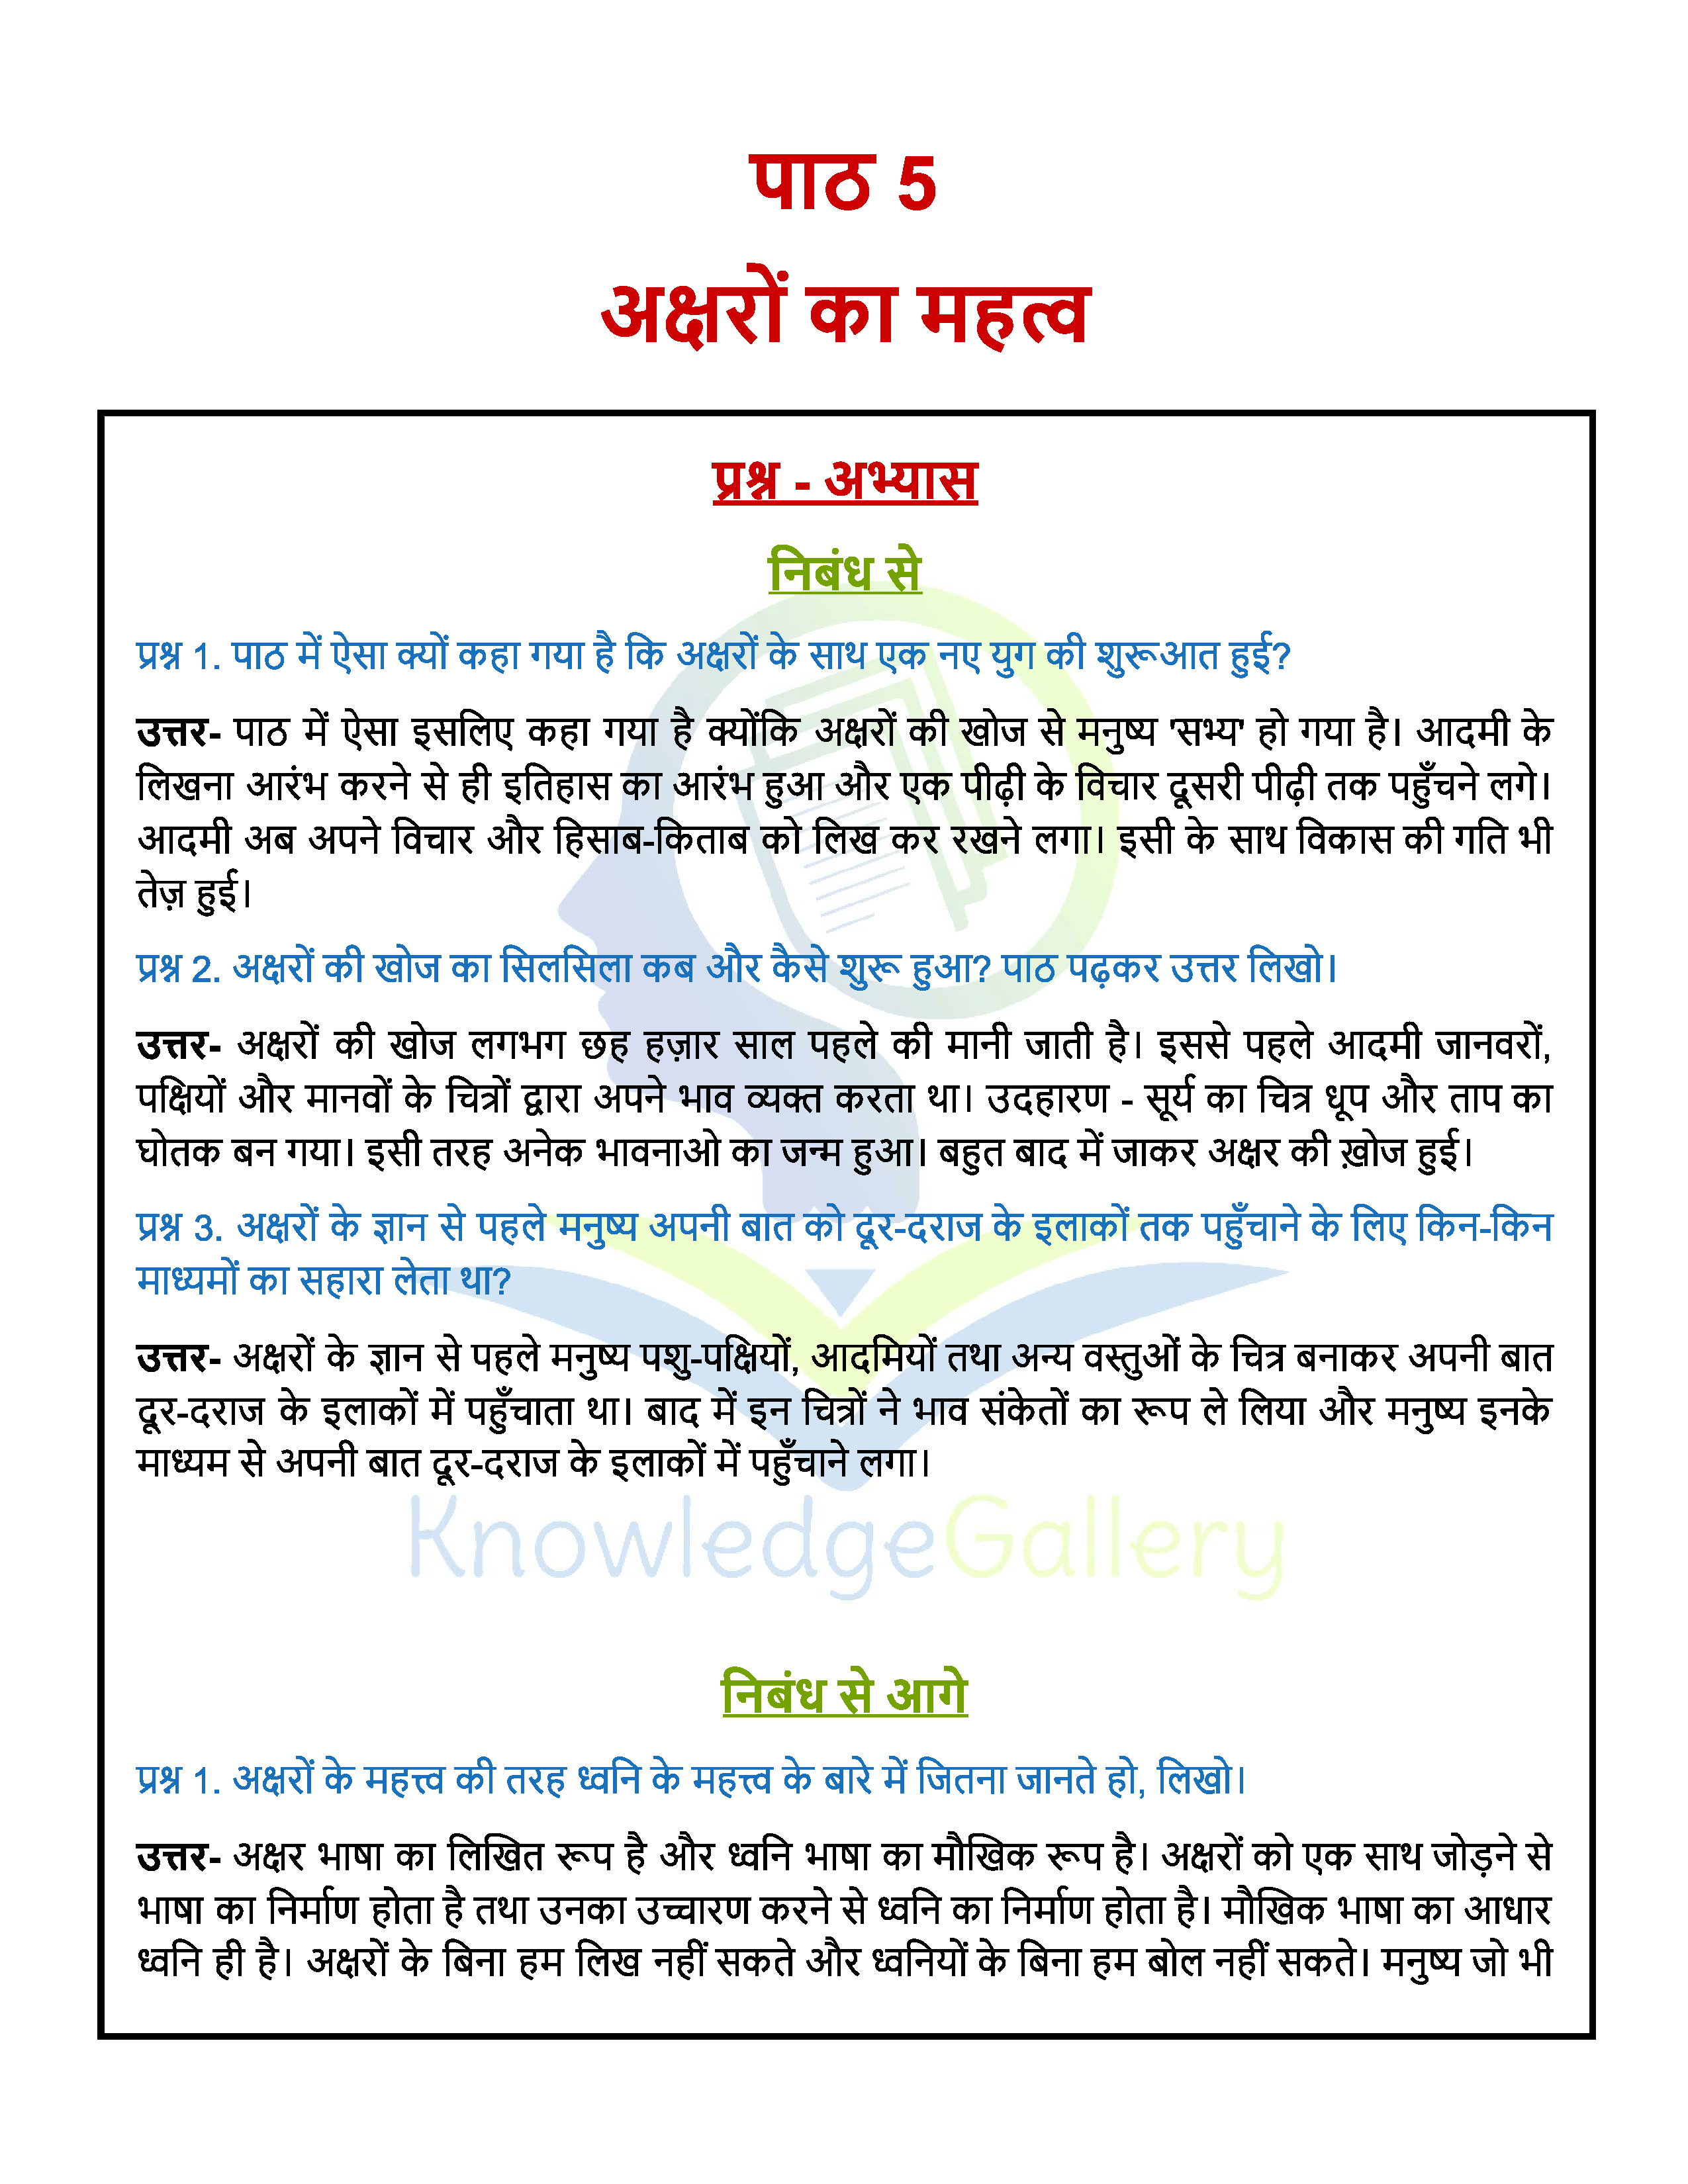 NCERT Solution For Class 6 Hindi Chapter 5 part 1